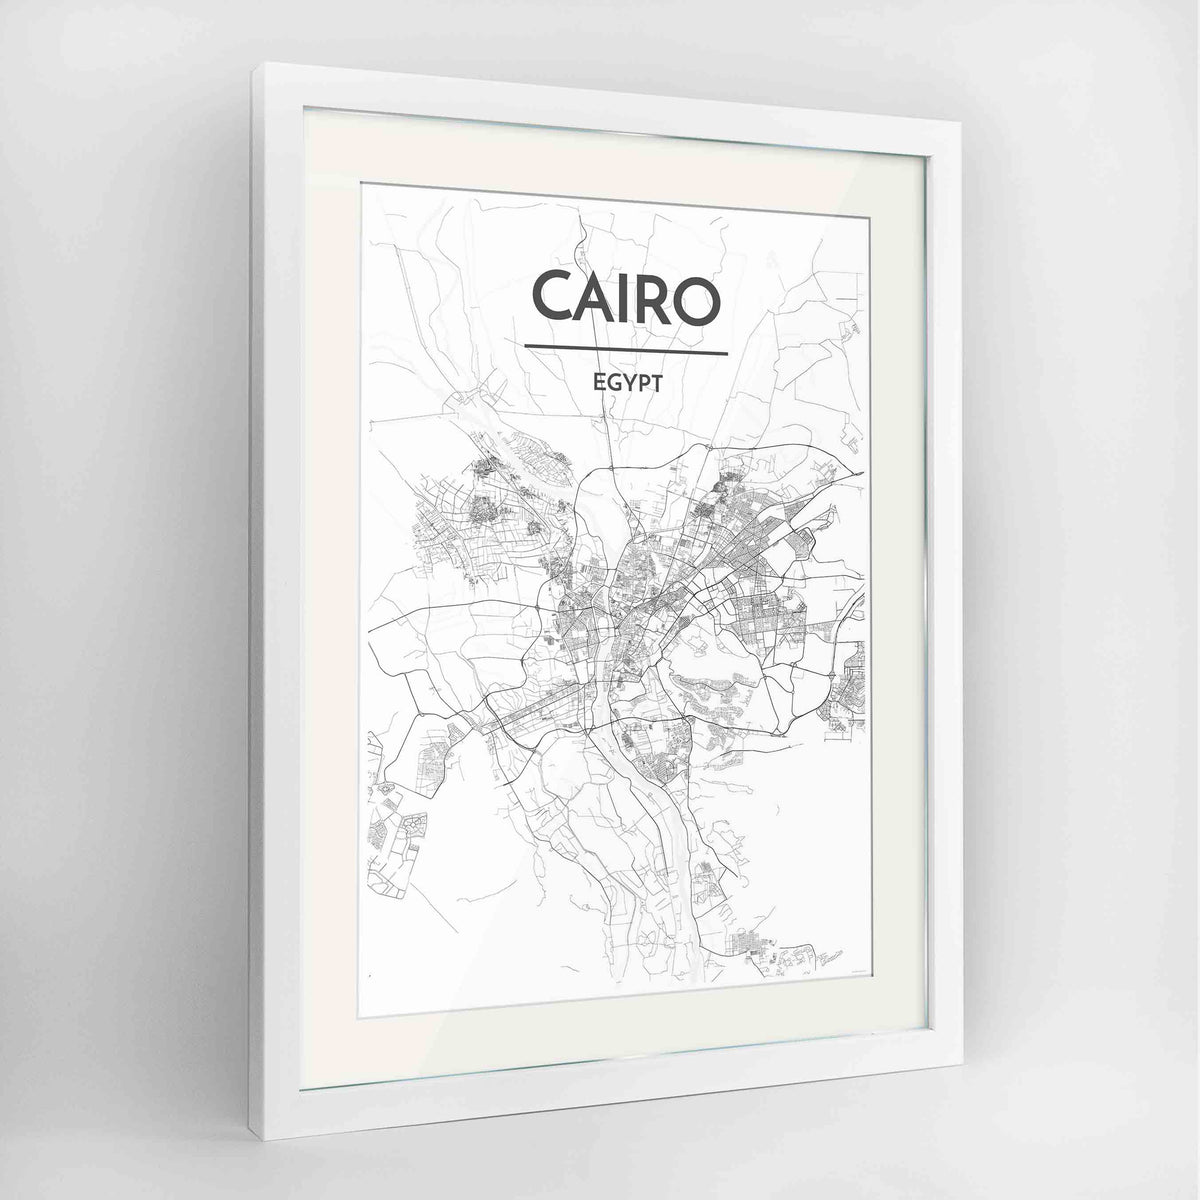 Framed Cairo Map Art Print 24x36&quot; Contemporary White frame Point Two Design Group